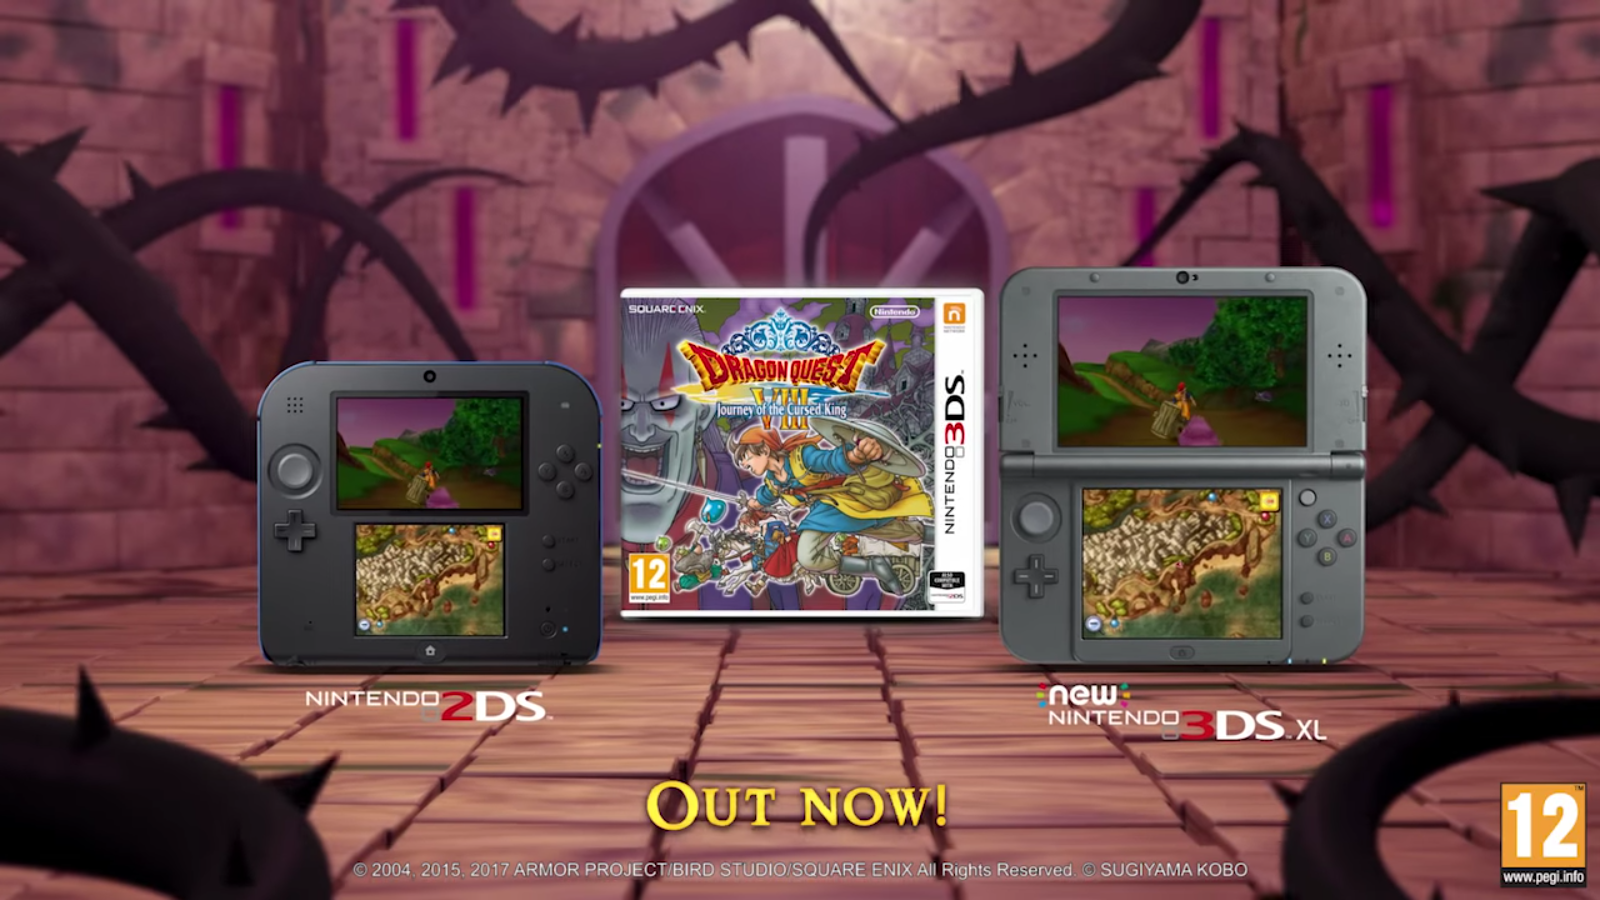 Dragon Quest VII Nintendo 3ds. Dragon Quest Nintendo Switch. NDS драгон квест. Nintendo 3ds Dragon Quest 7. Nintendo quest